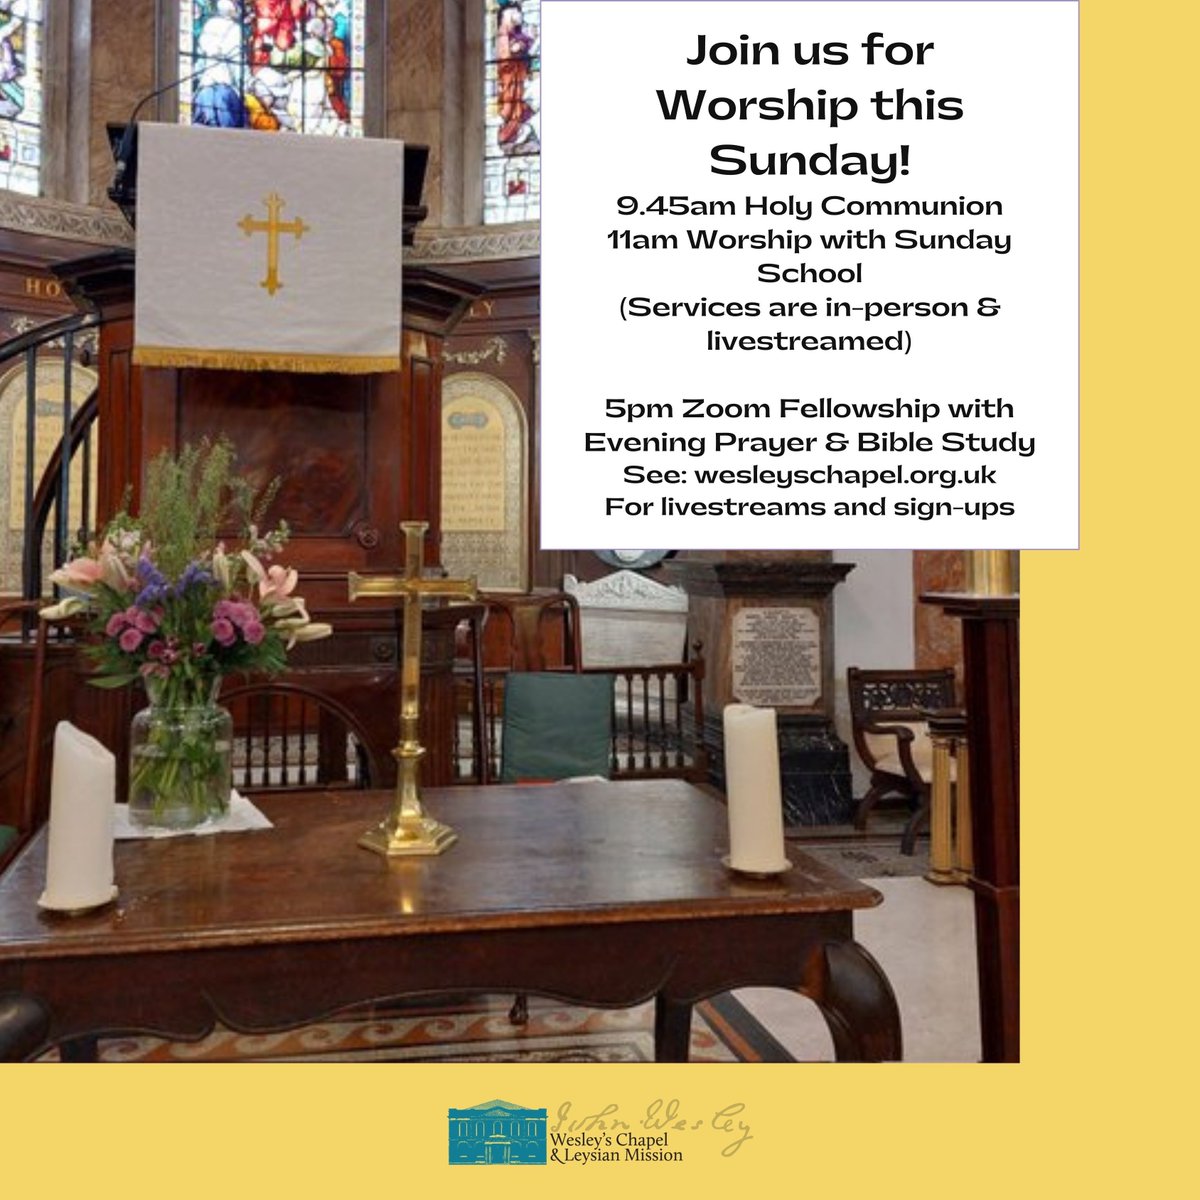 Today we're open 10.30am - 4pm. Tomorrow we meet for worship. Why not come along?